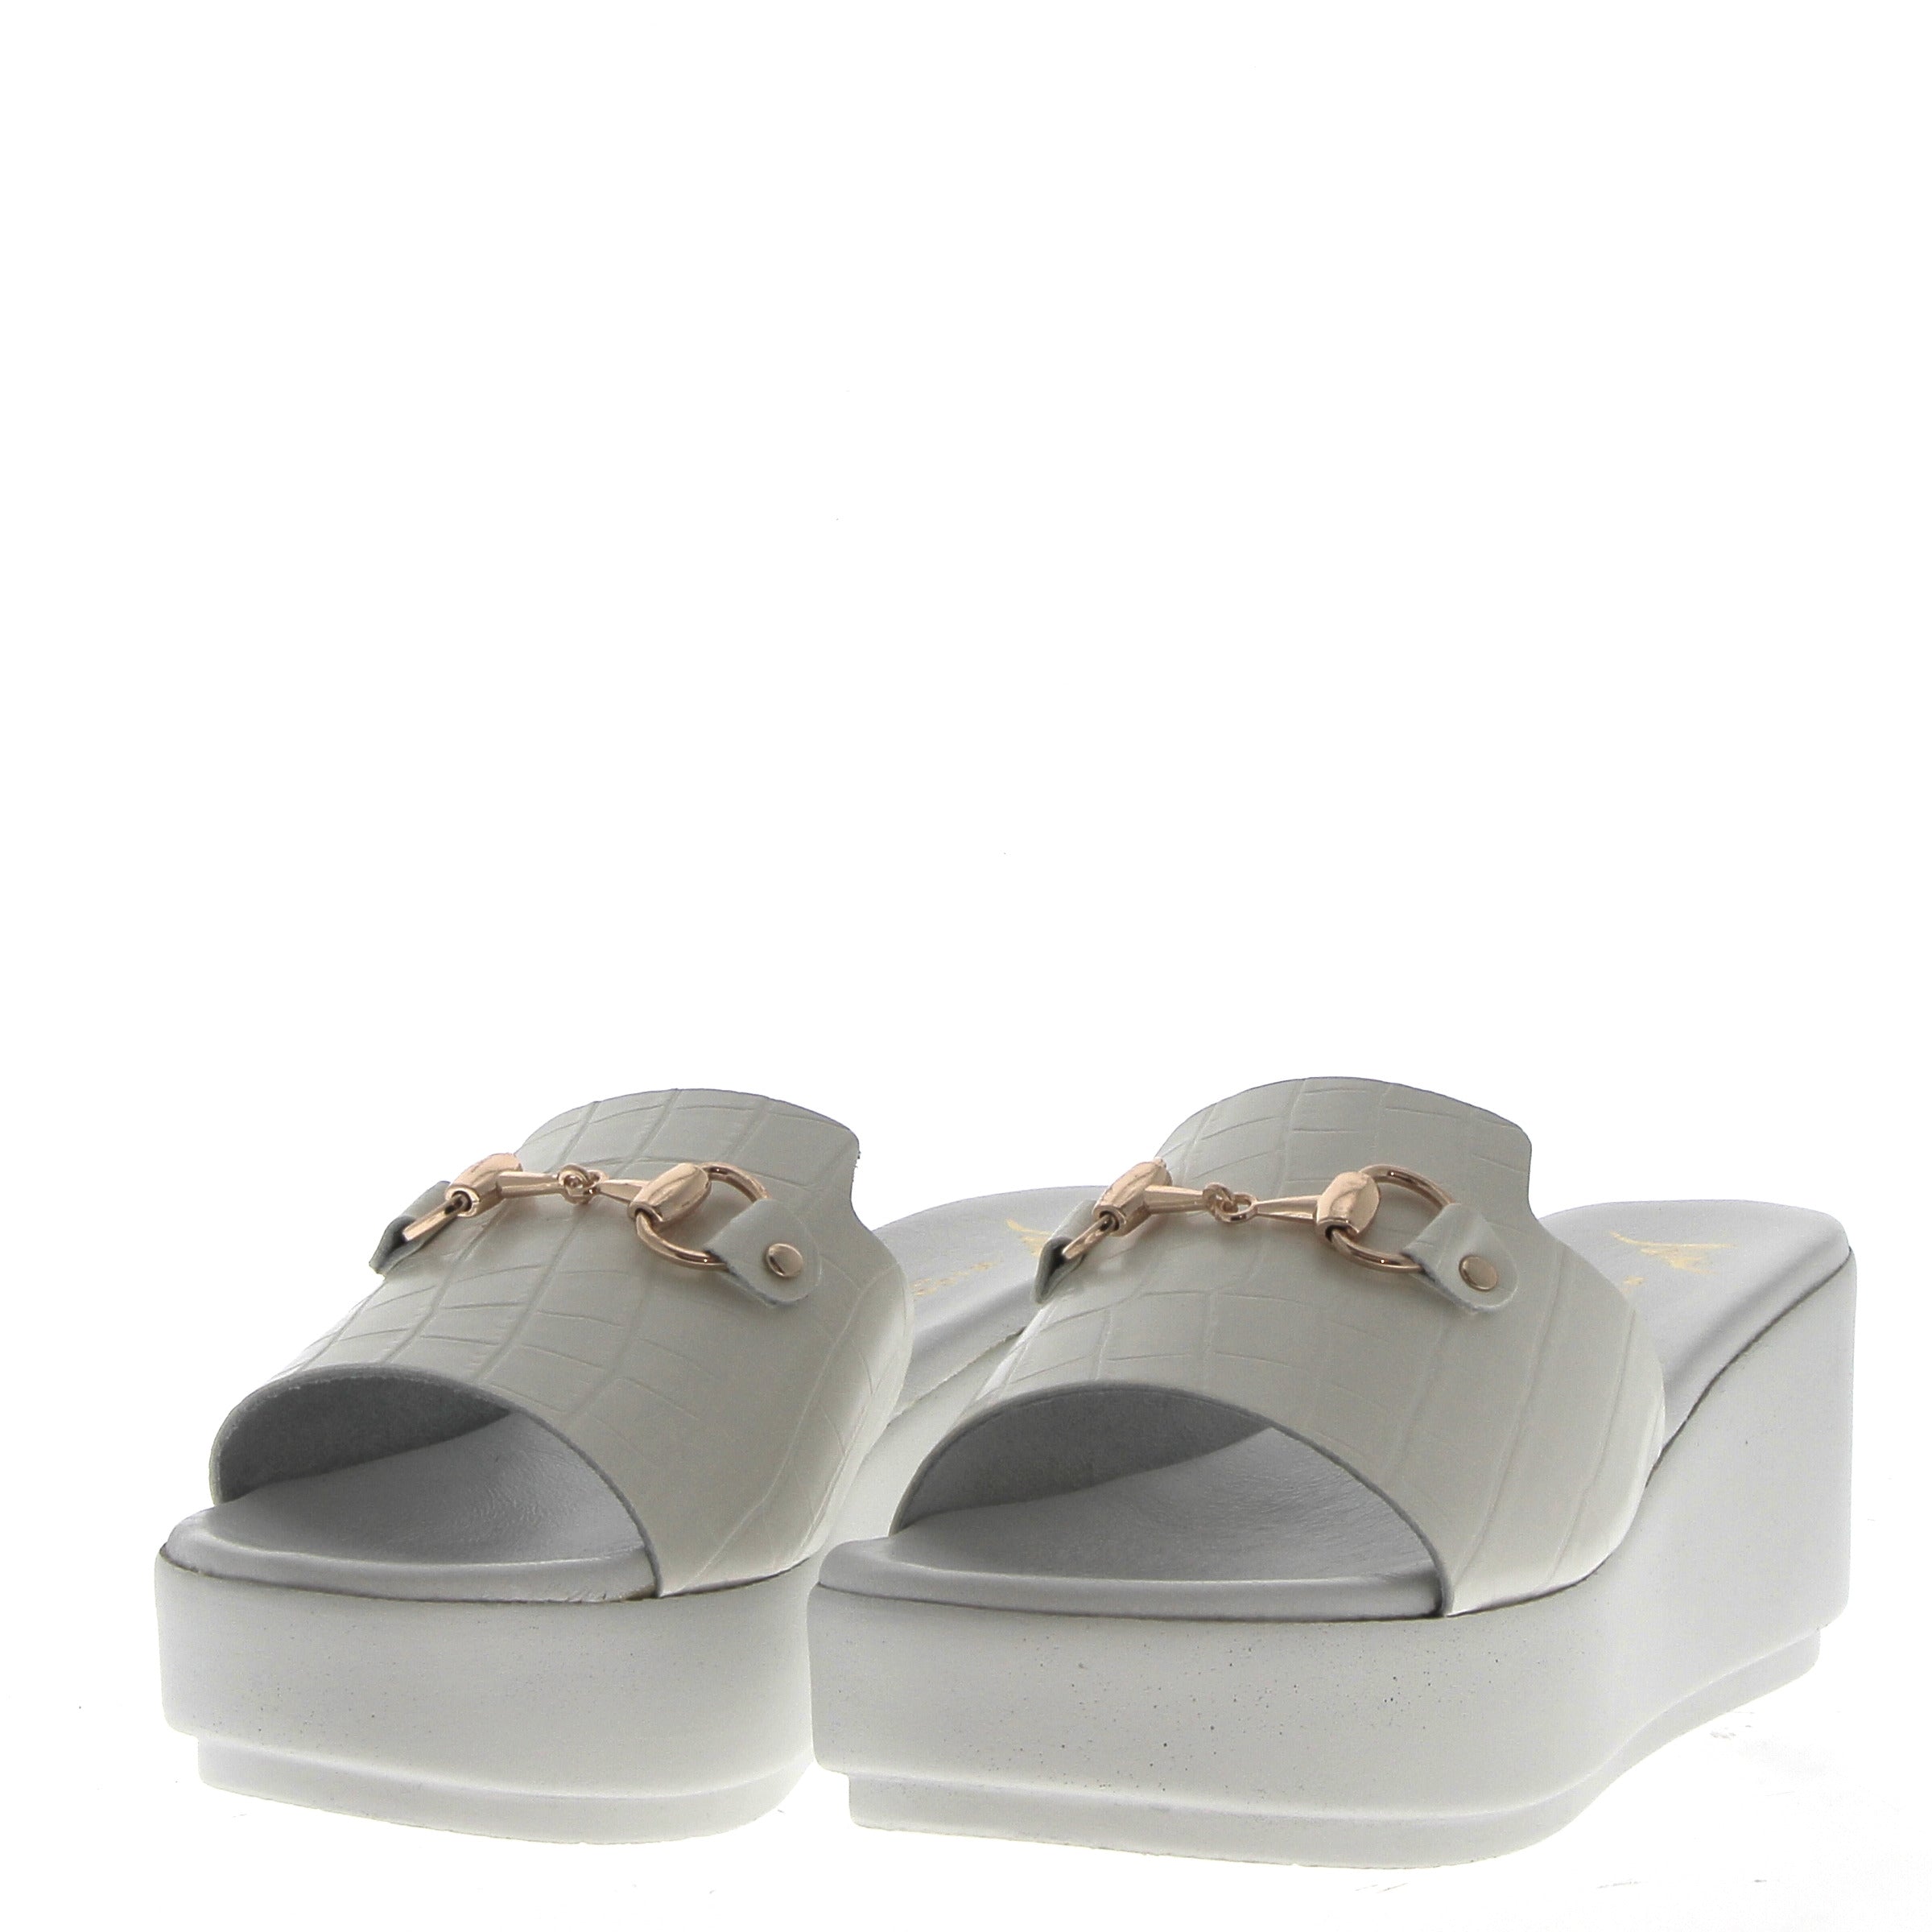 White sandal on light wedge with coconut finish